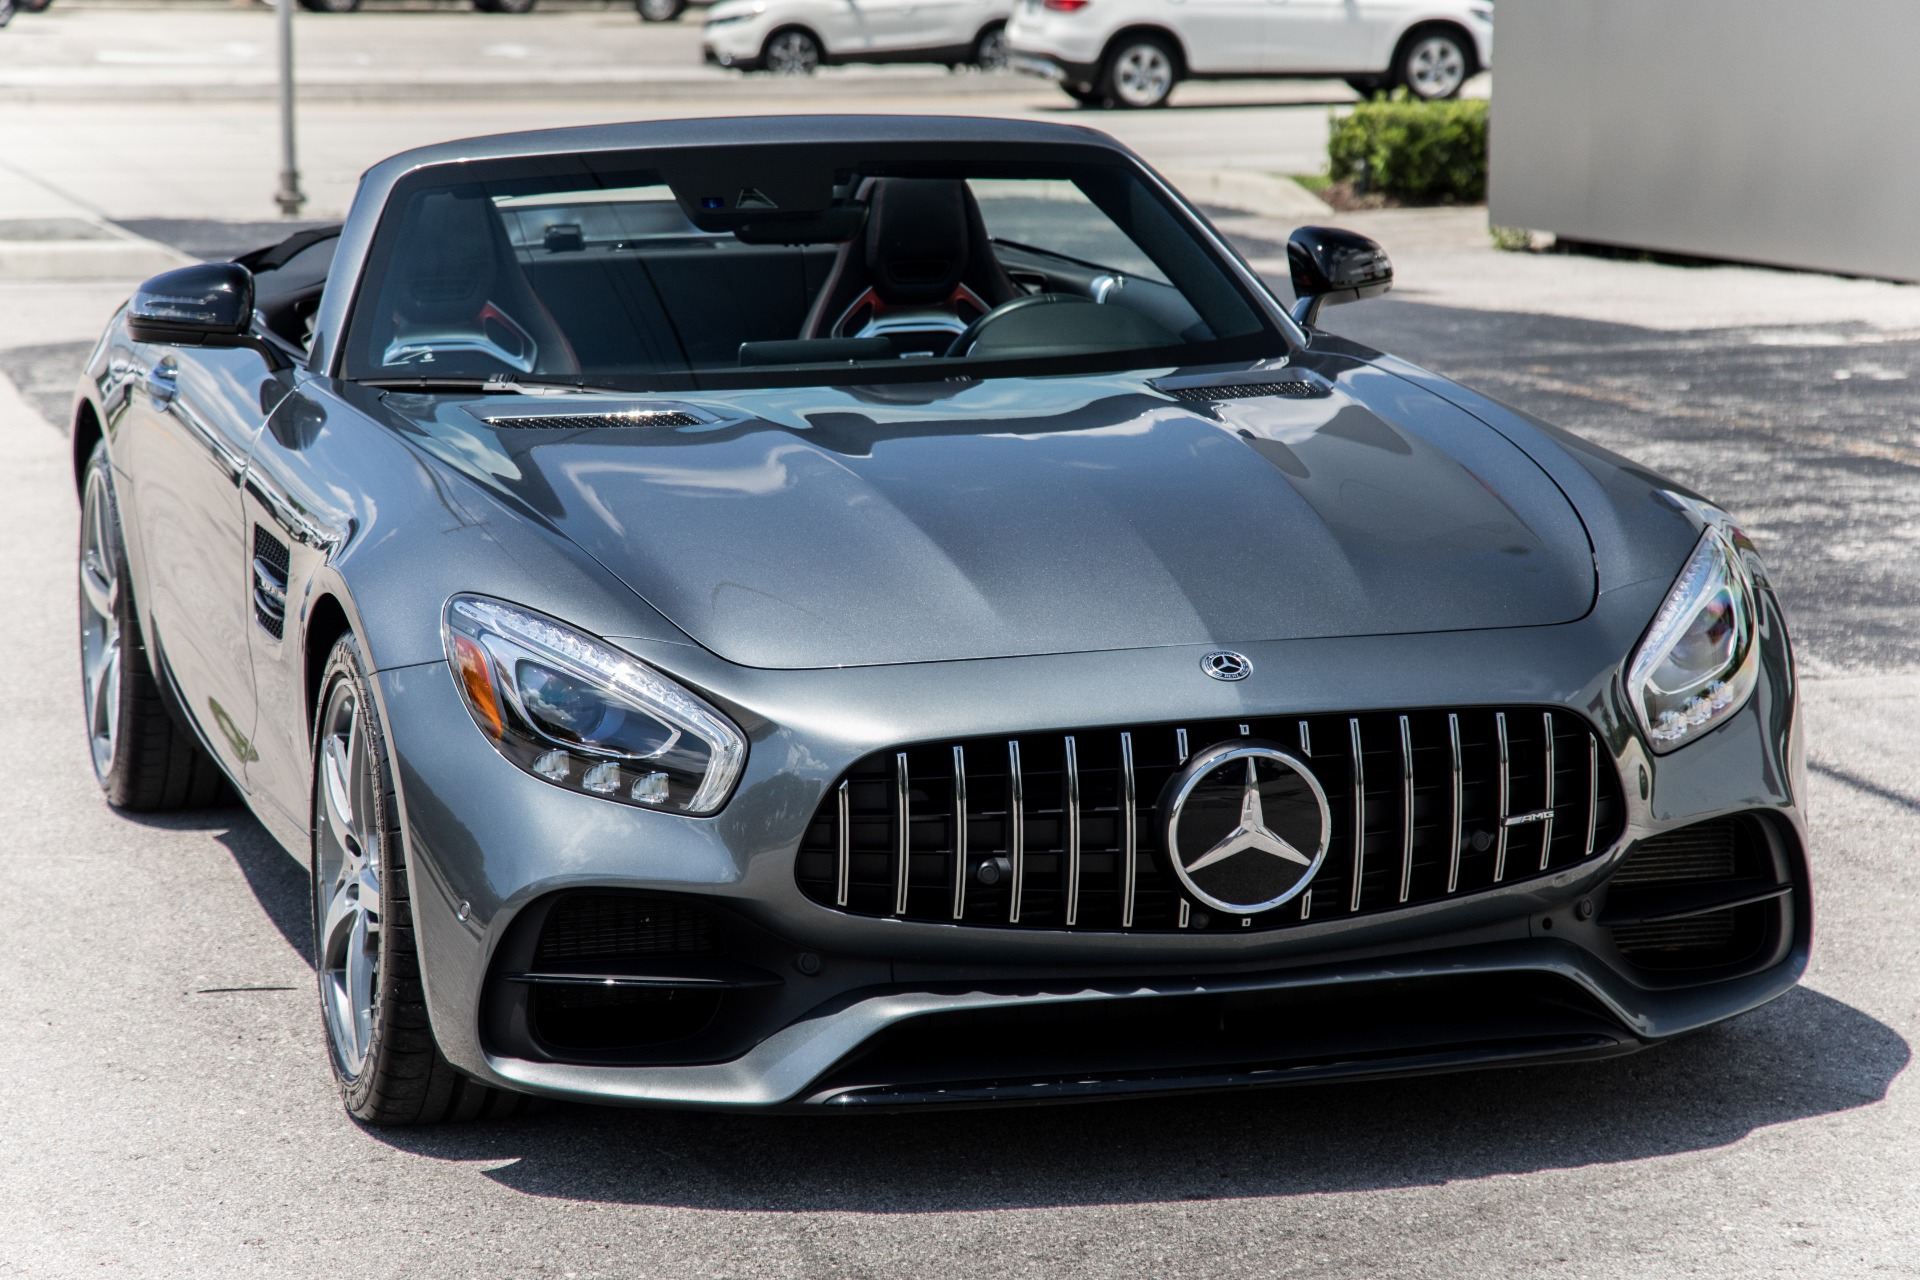 Used 2019 Mercedes Benz AMG GT For Sale 114 900 Marino Performance 